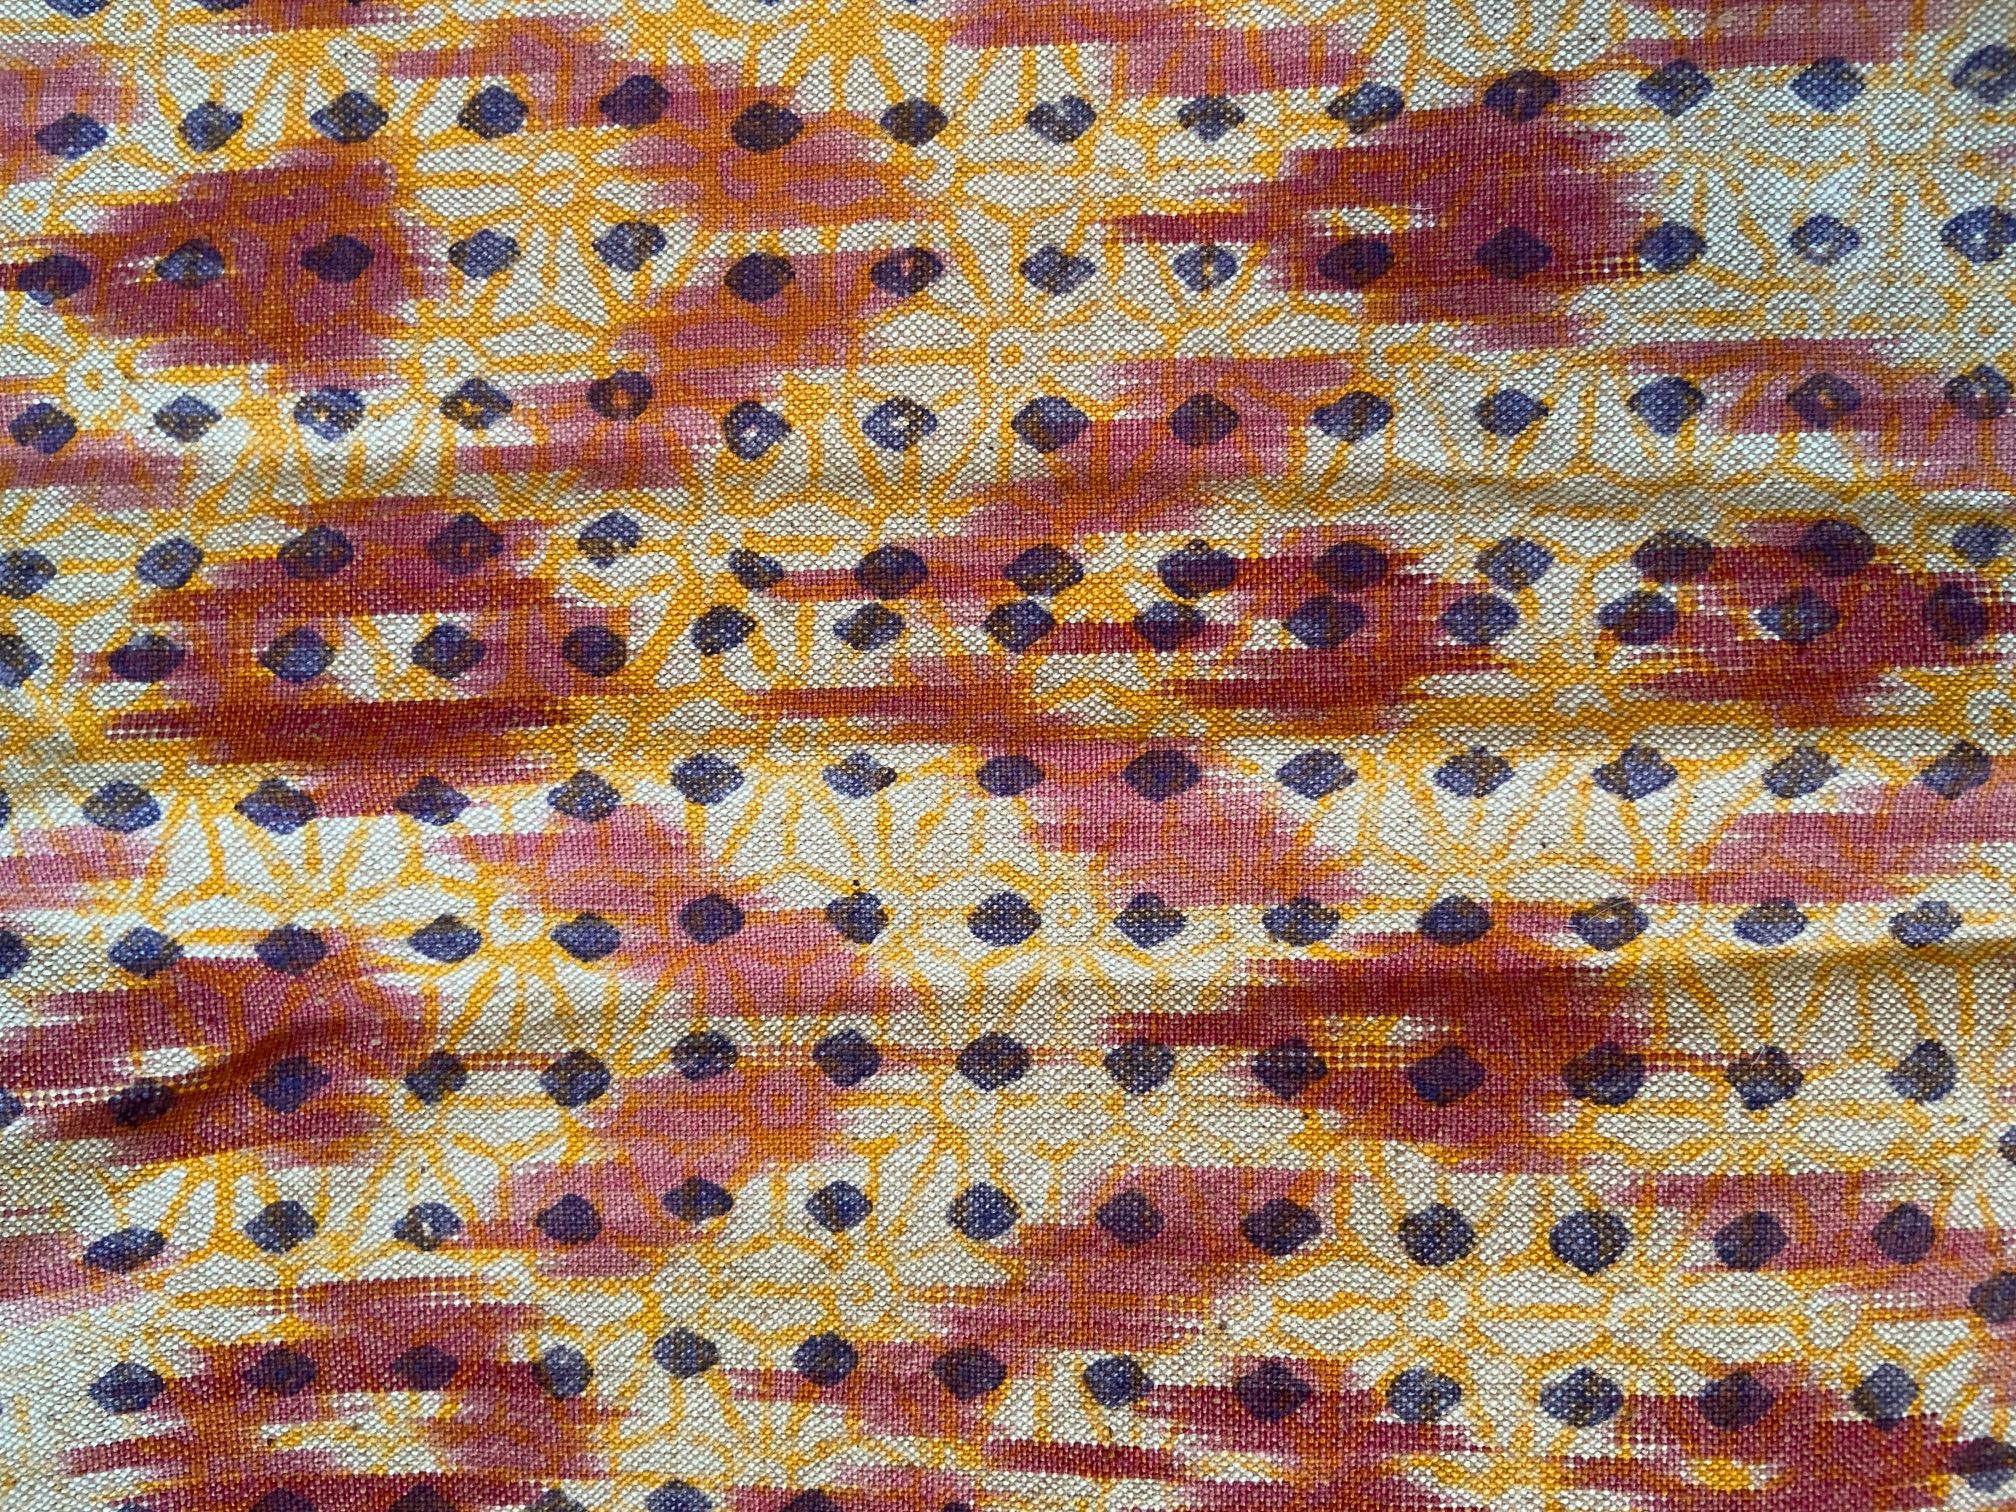 Cotton Contemporary Gregory Parkinson Tablecloth with Pattern on Ikat Textile, USA For Sale